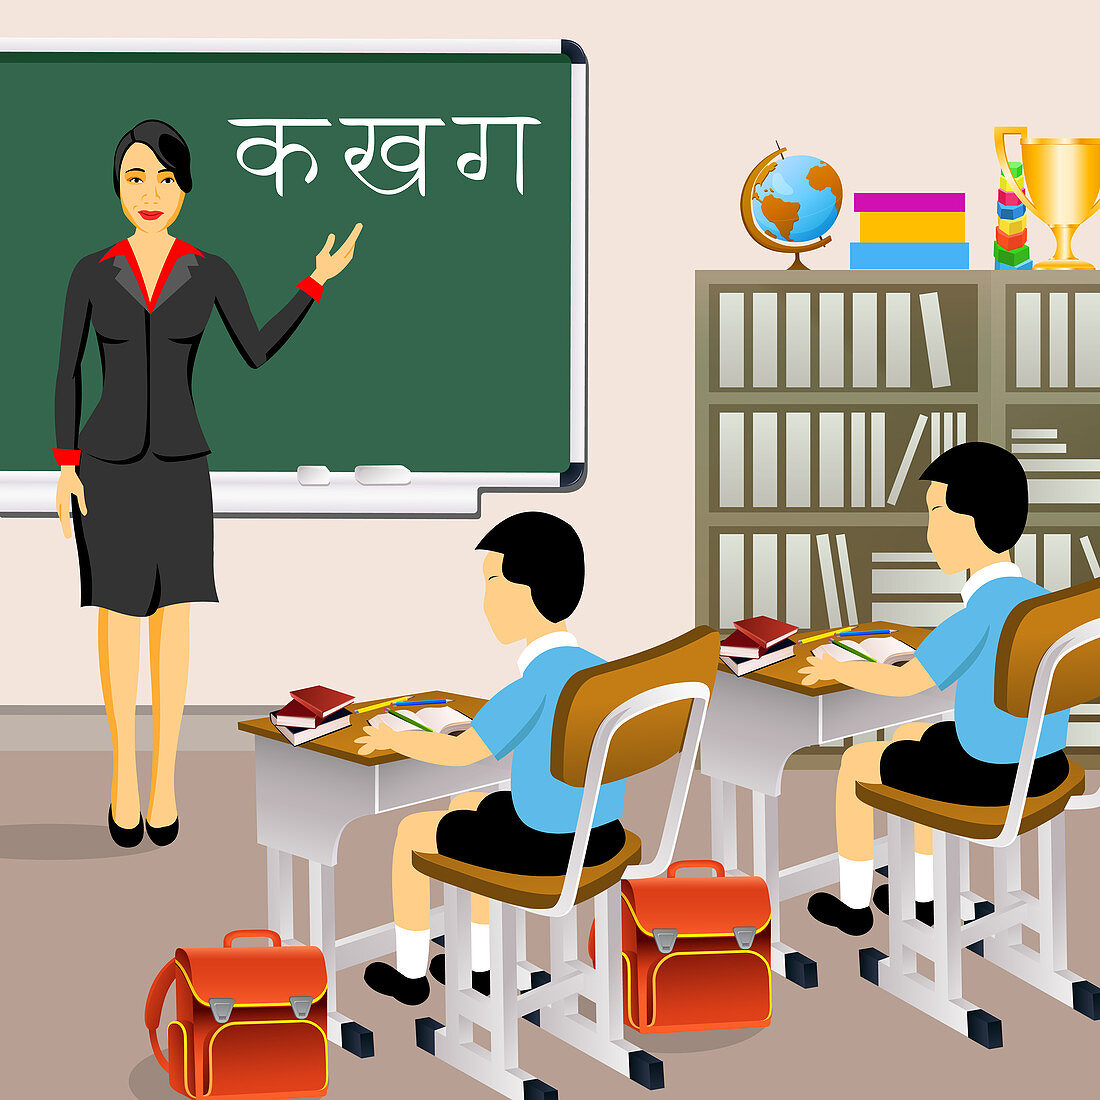 Female teacher with students in a classroom, illustration